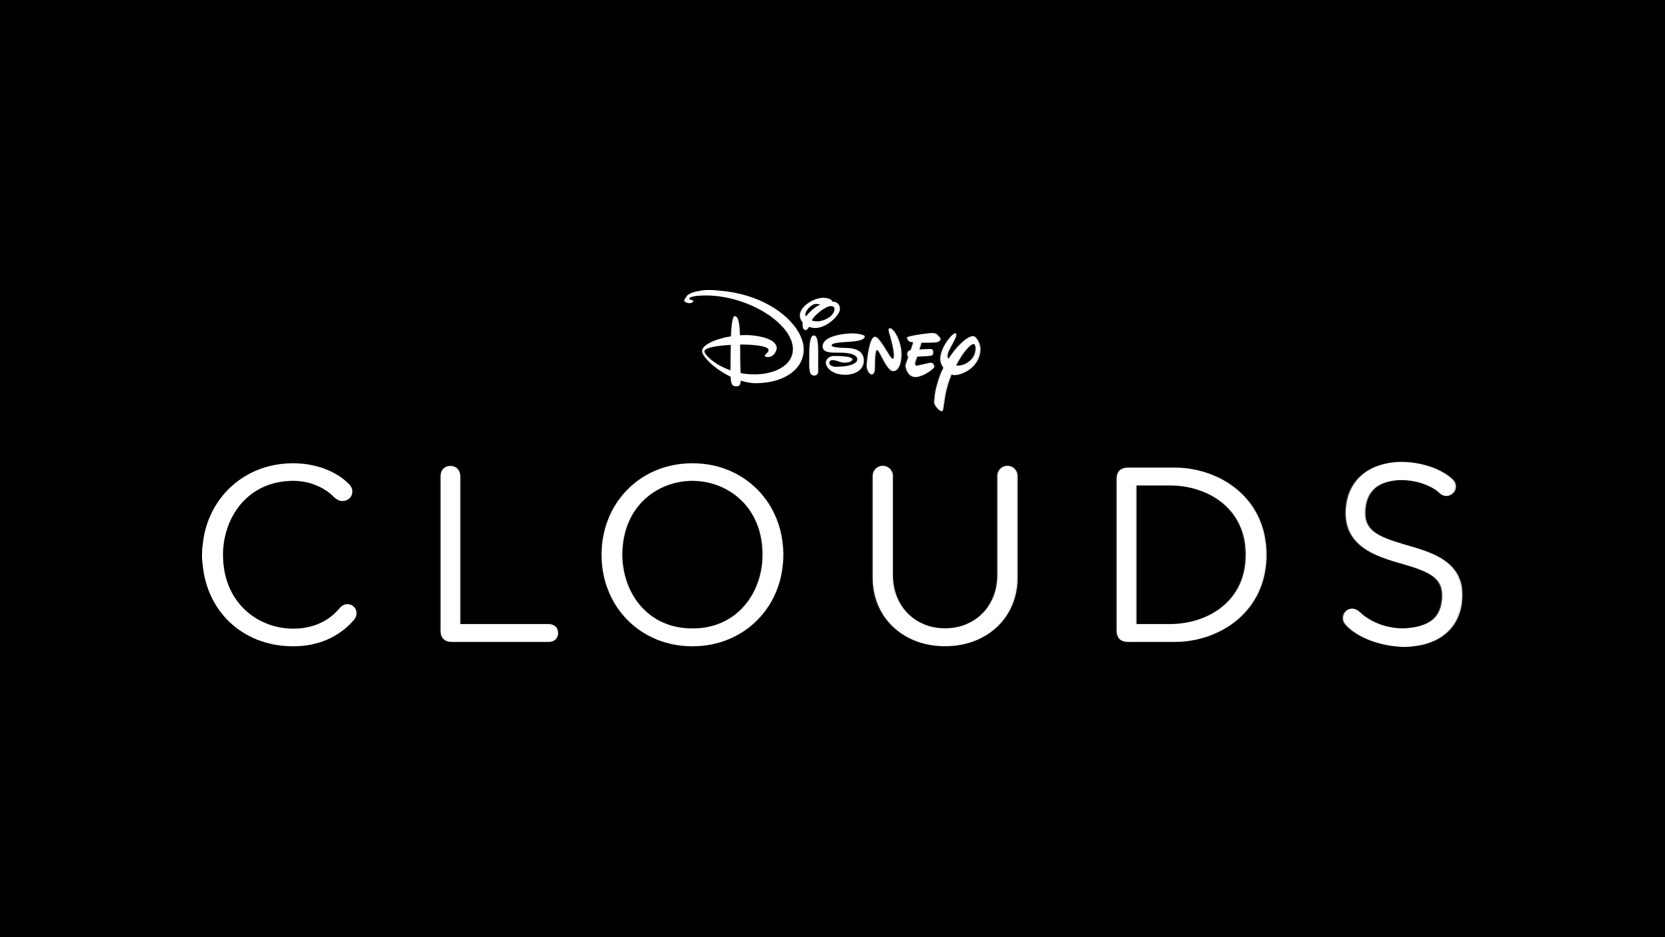 Disney+ original “Clouds” rises to the top on October 16 